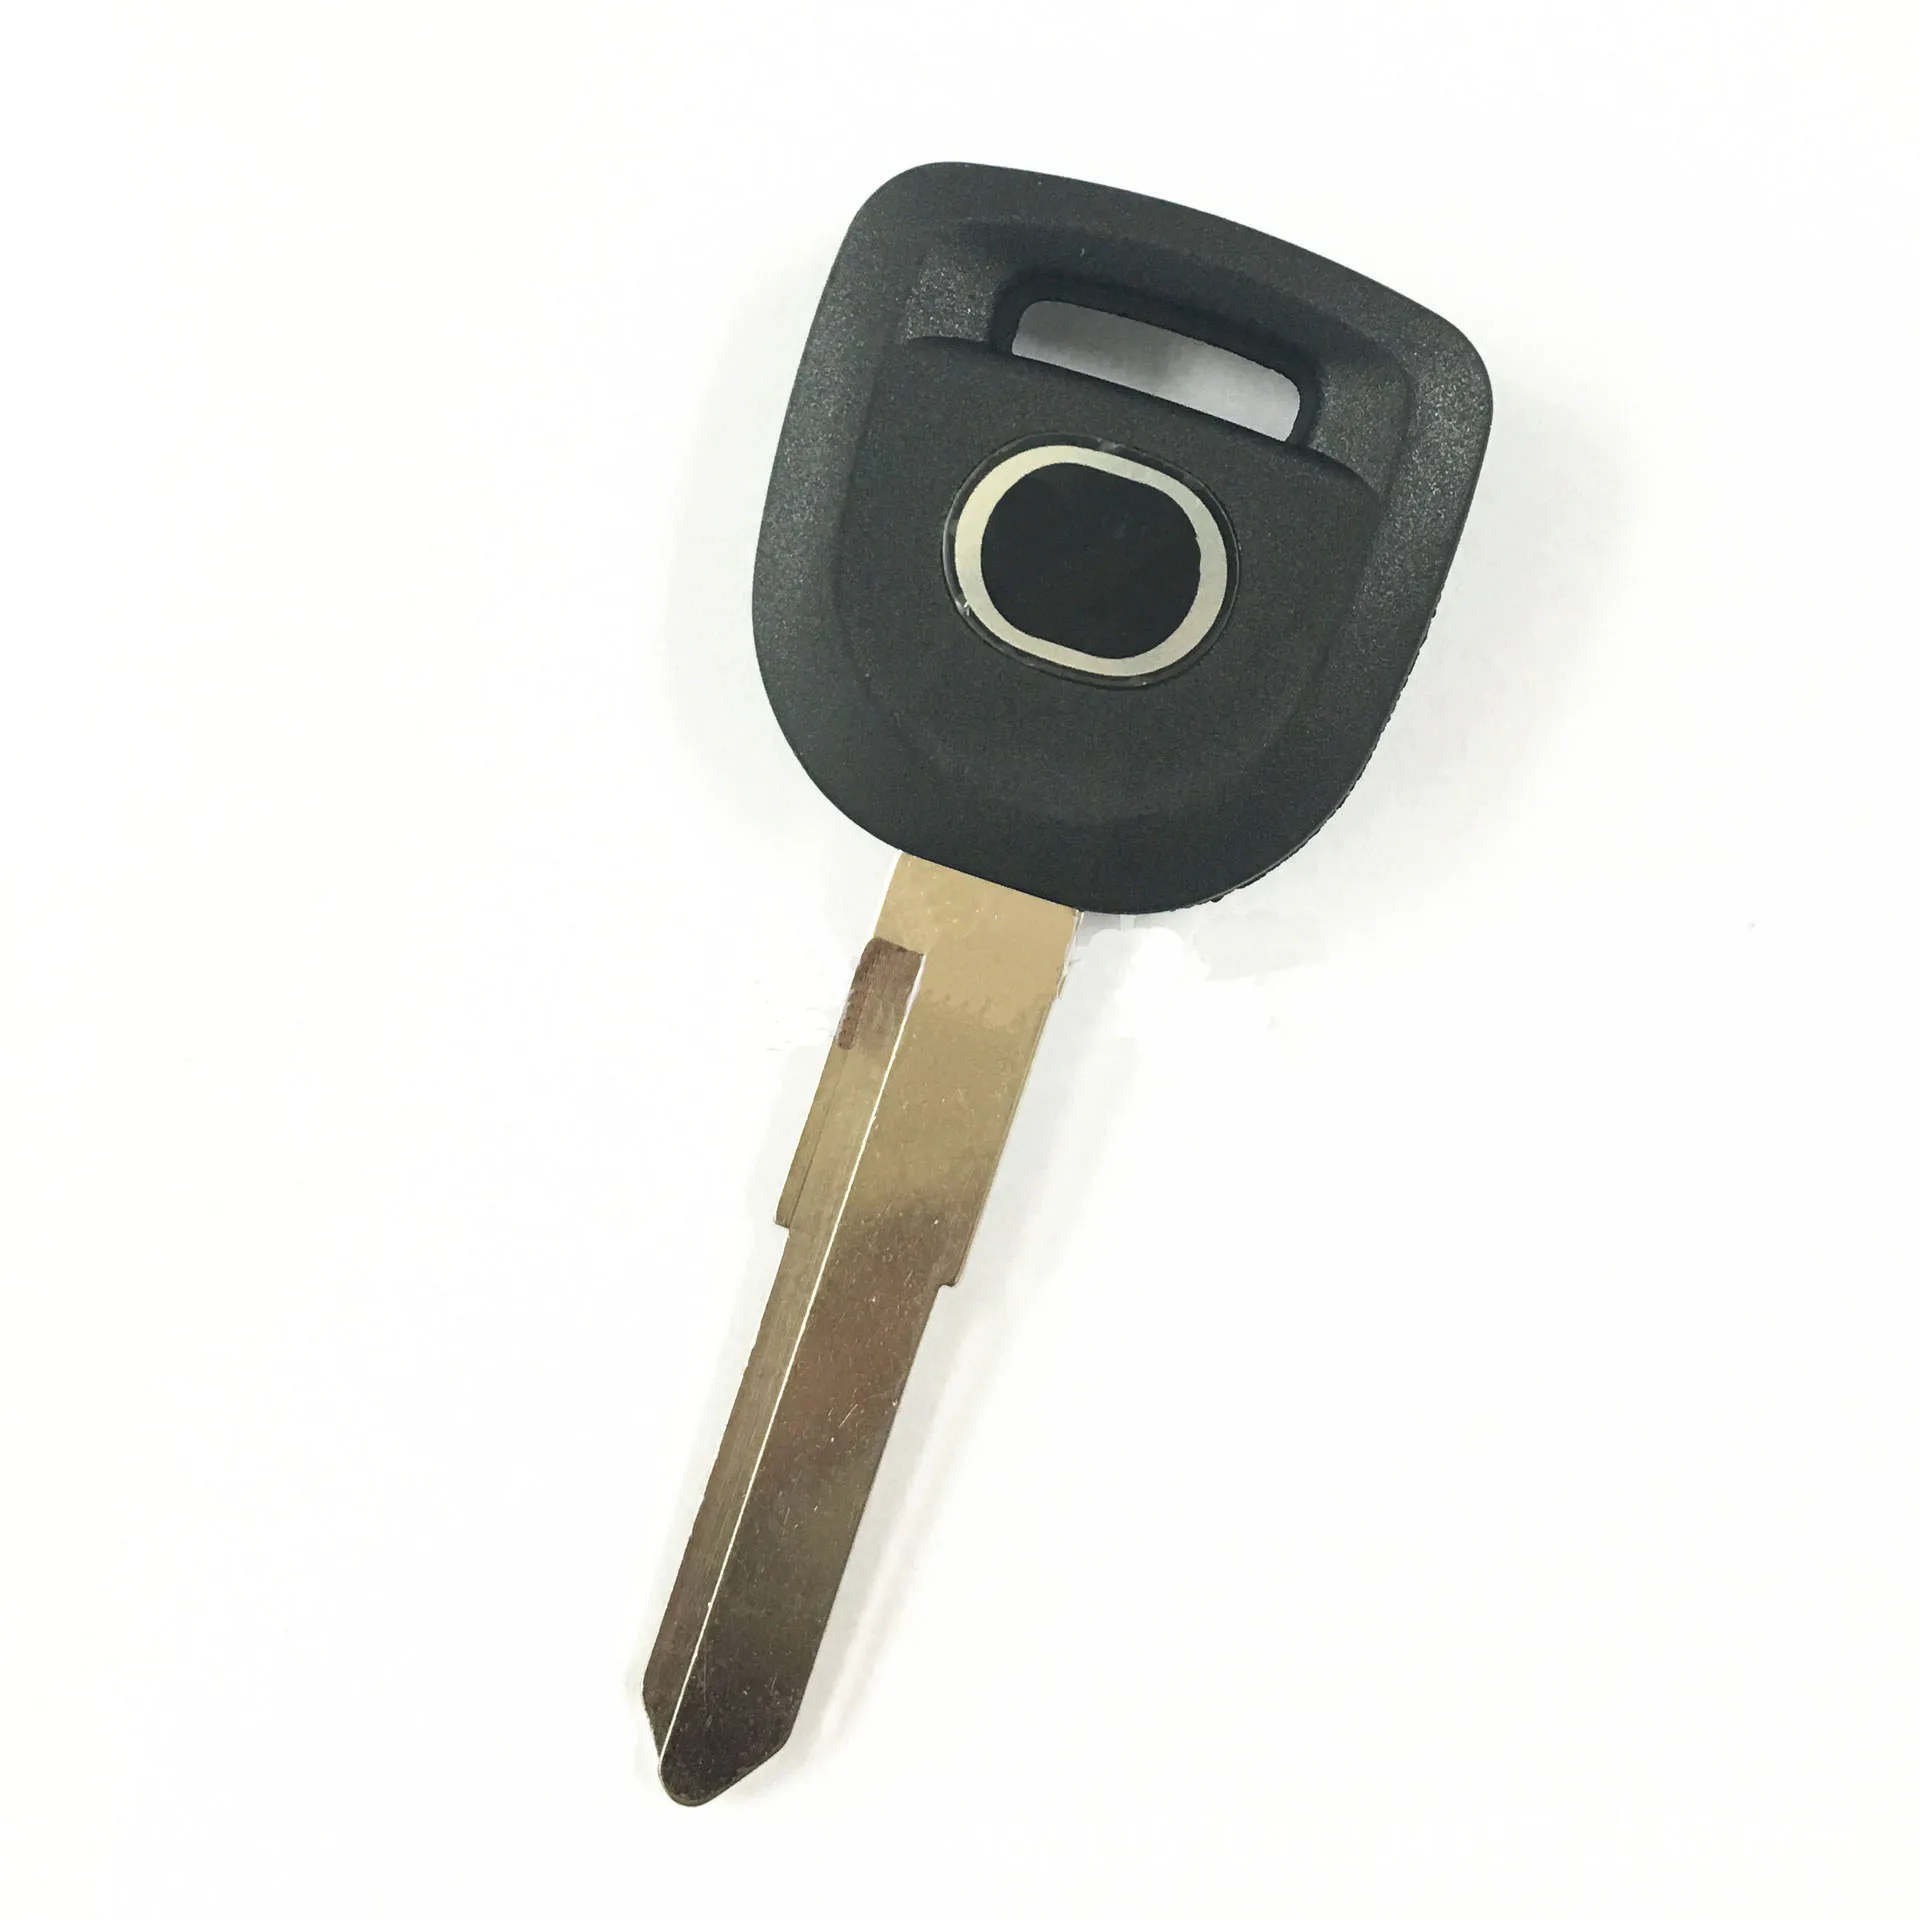 2 New Replacement Uncut Blade Ignition Car Valet Blank Key 1181FD H53  No Chip 